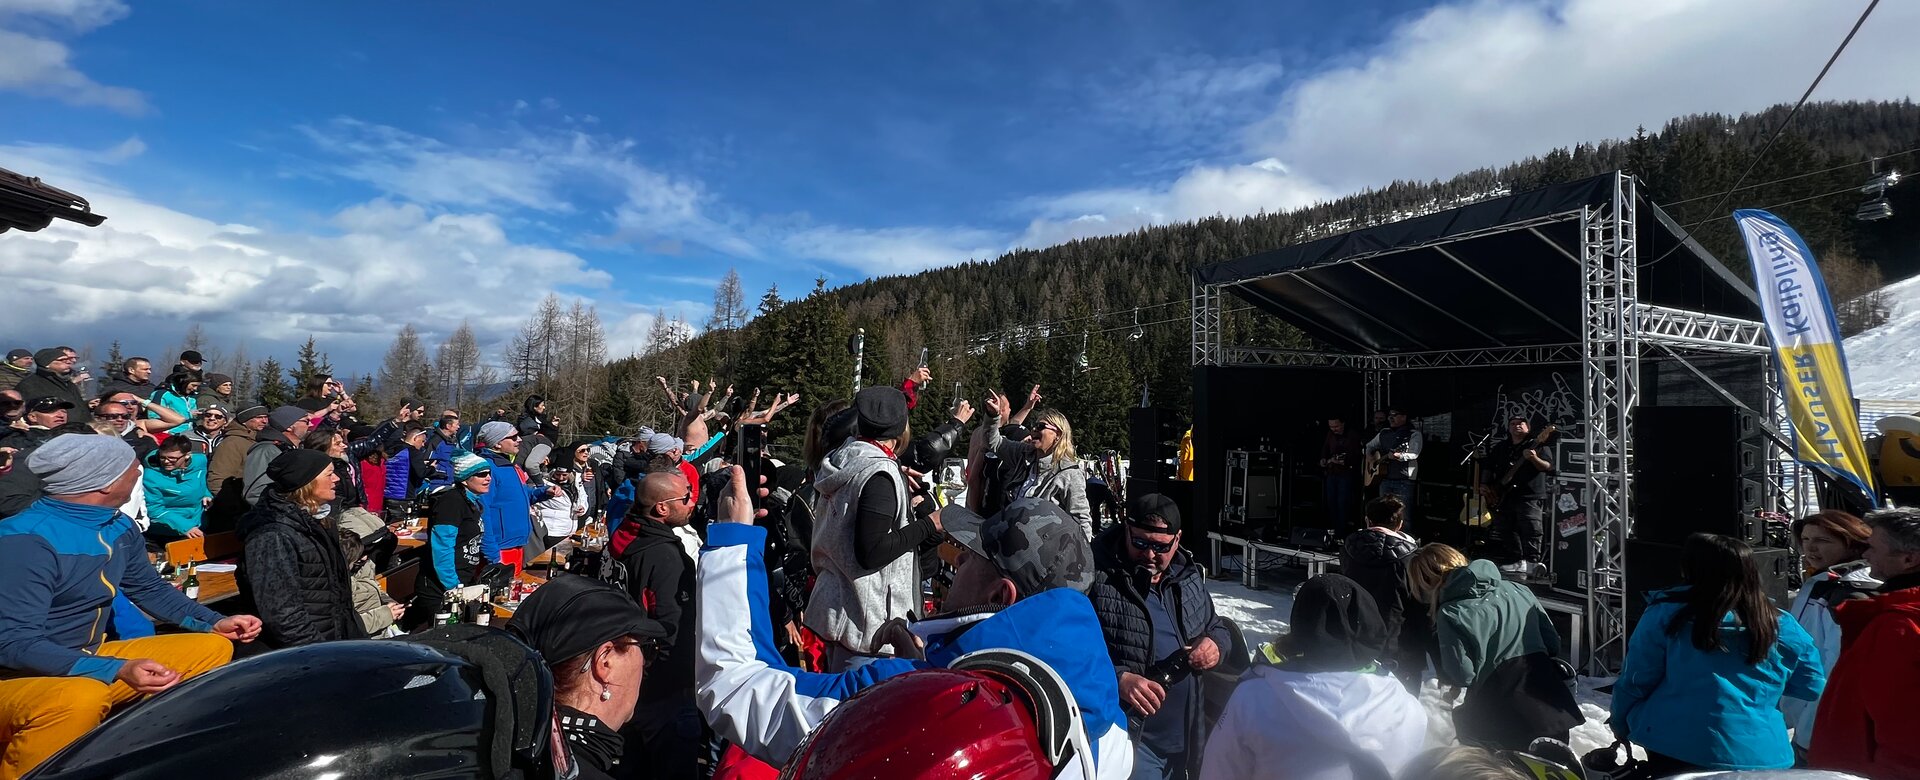 Many people in ski gear stand in front of a small stage on which musicians play. | © Hauser Kaibling